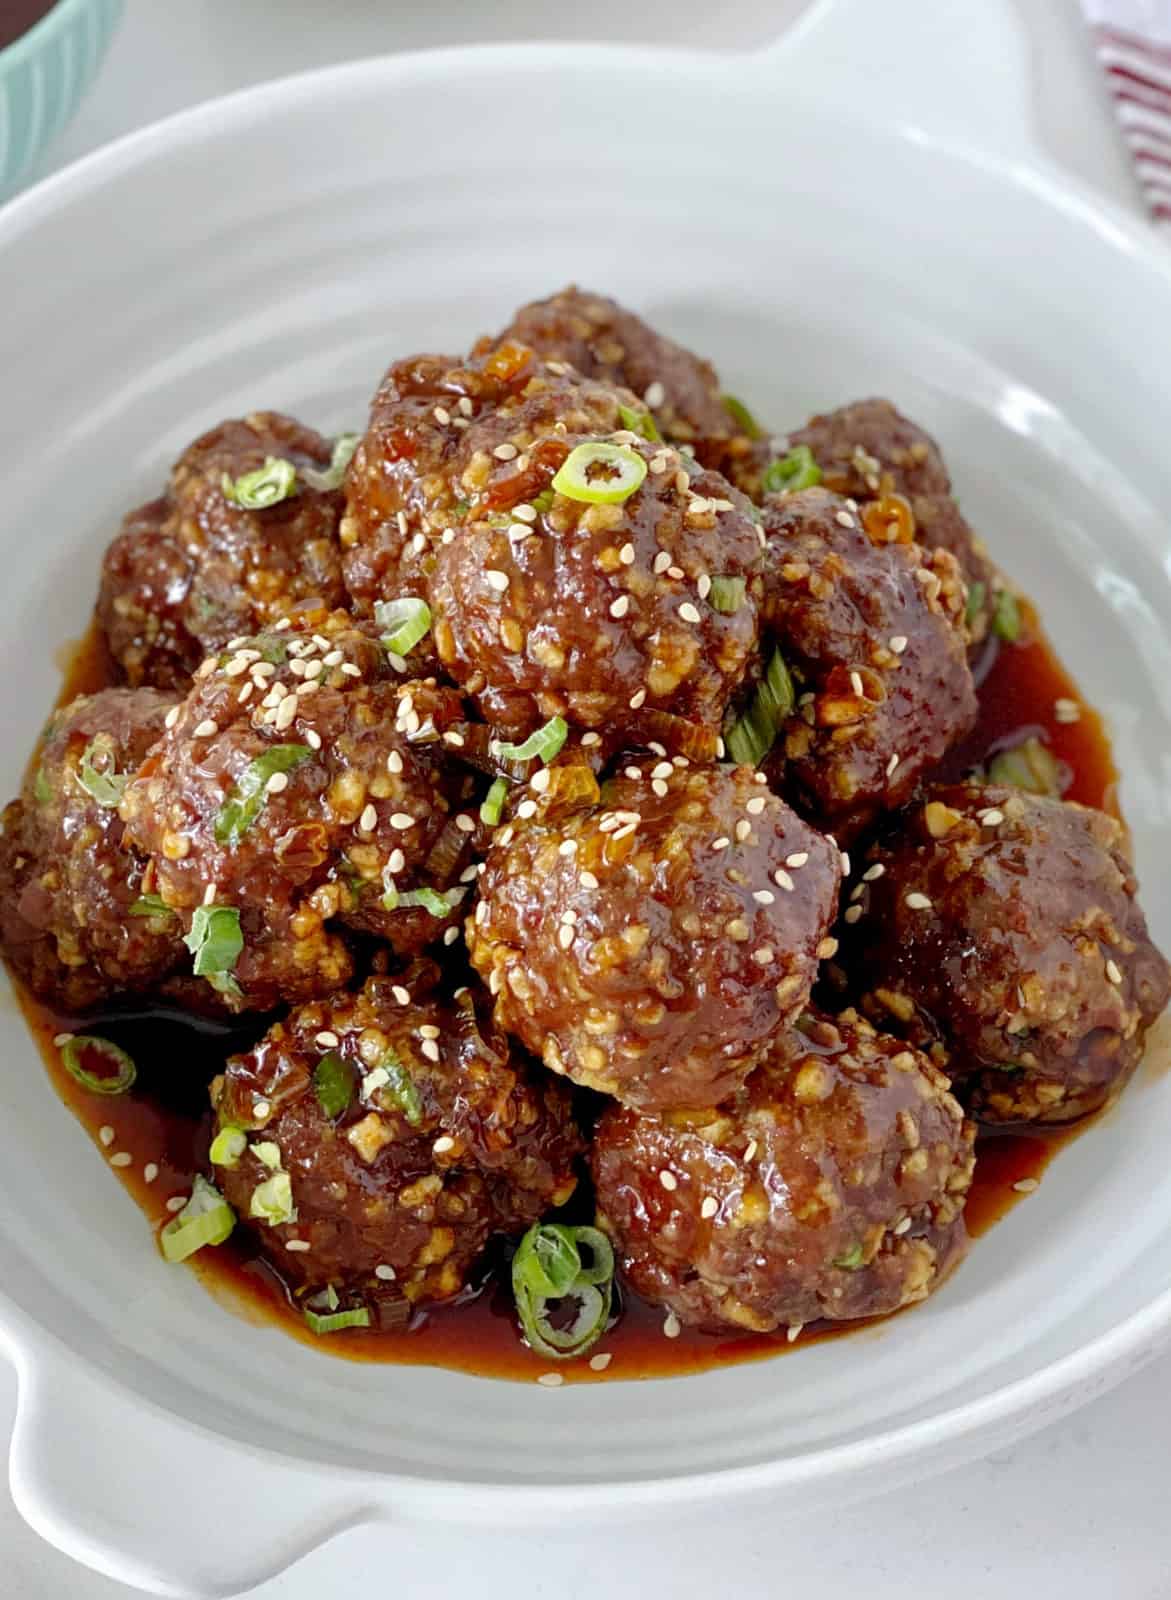 Meatballs in a bowl with sauce and garnish onions